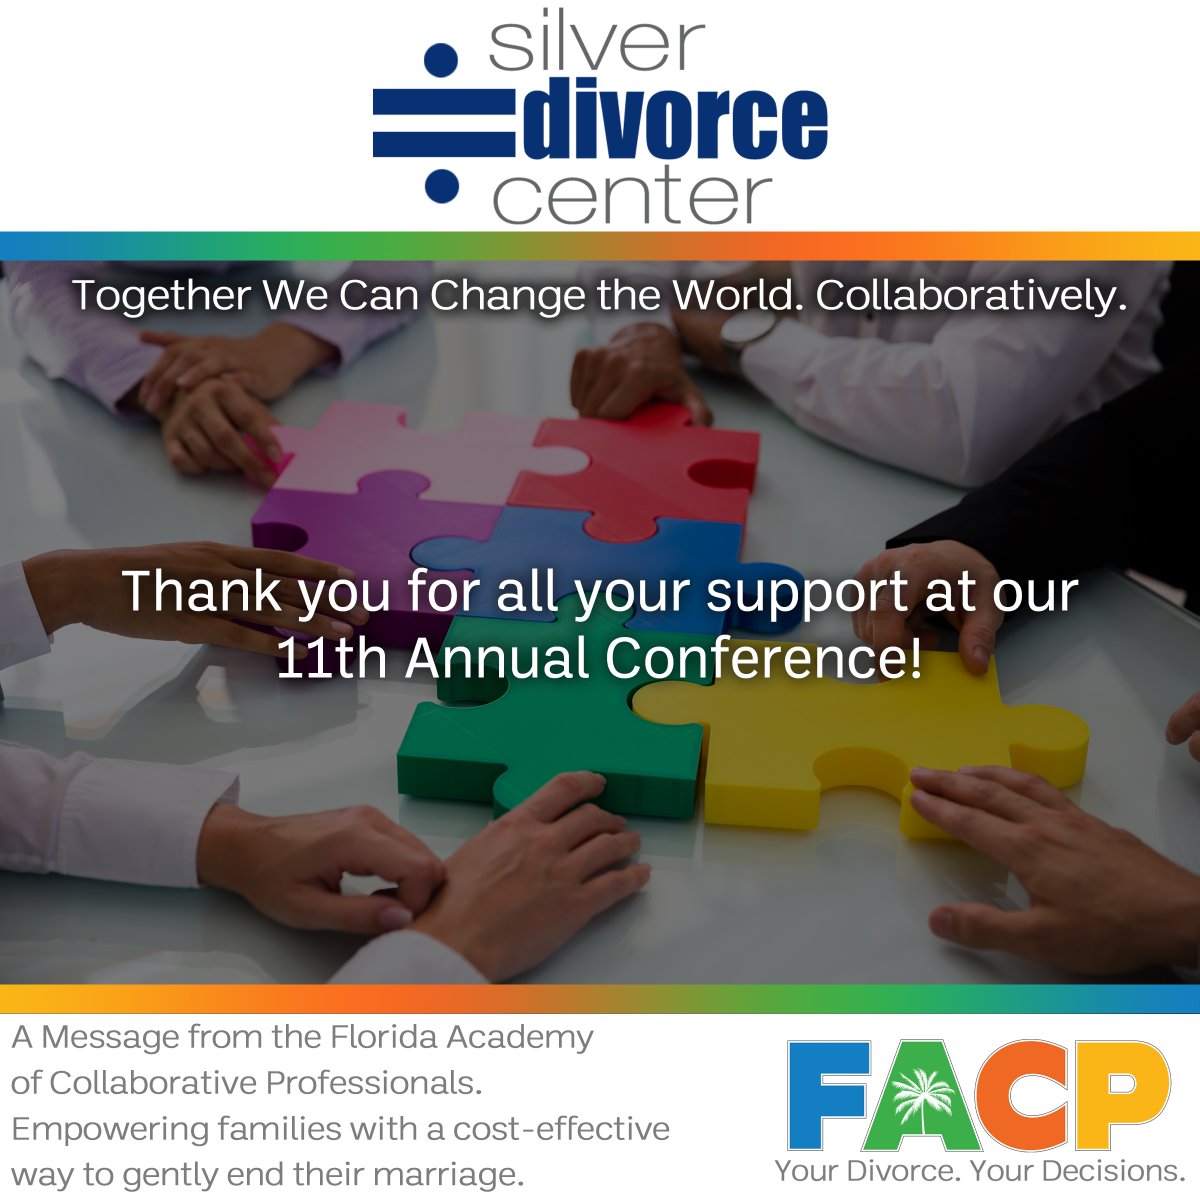 Thank you, Elaine Silver of Silver Divorce Center, for your dedicated sponsorship and support in making our conference a reality. We value your partnership!

#ConferenceSponsorship #Appreciation #FACP2023 #SilverDivorceCenter